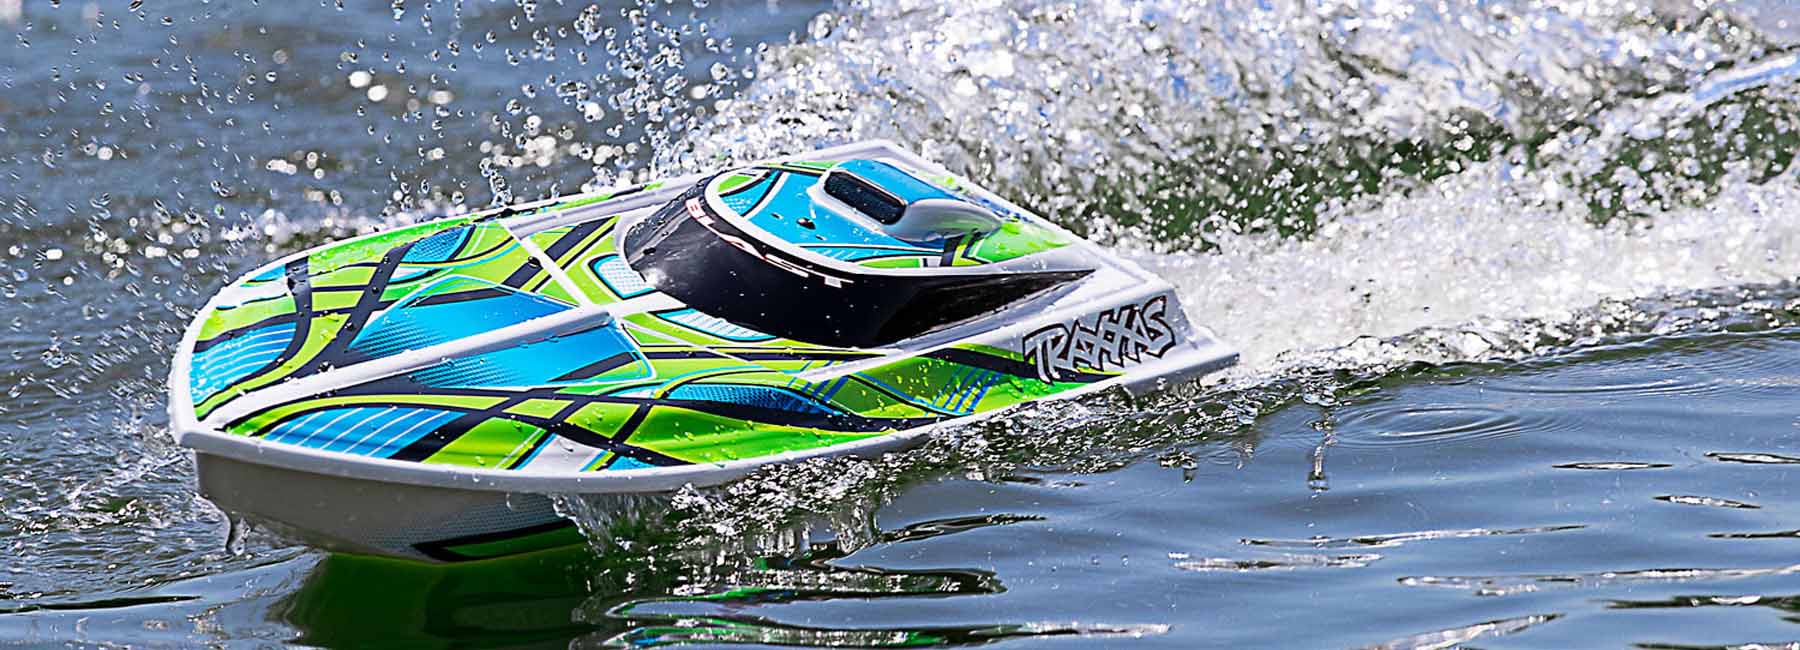 Green RC Boat with big wake